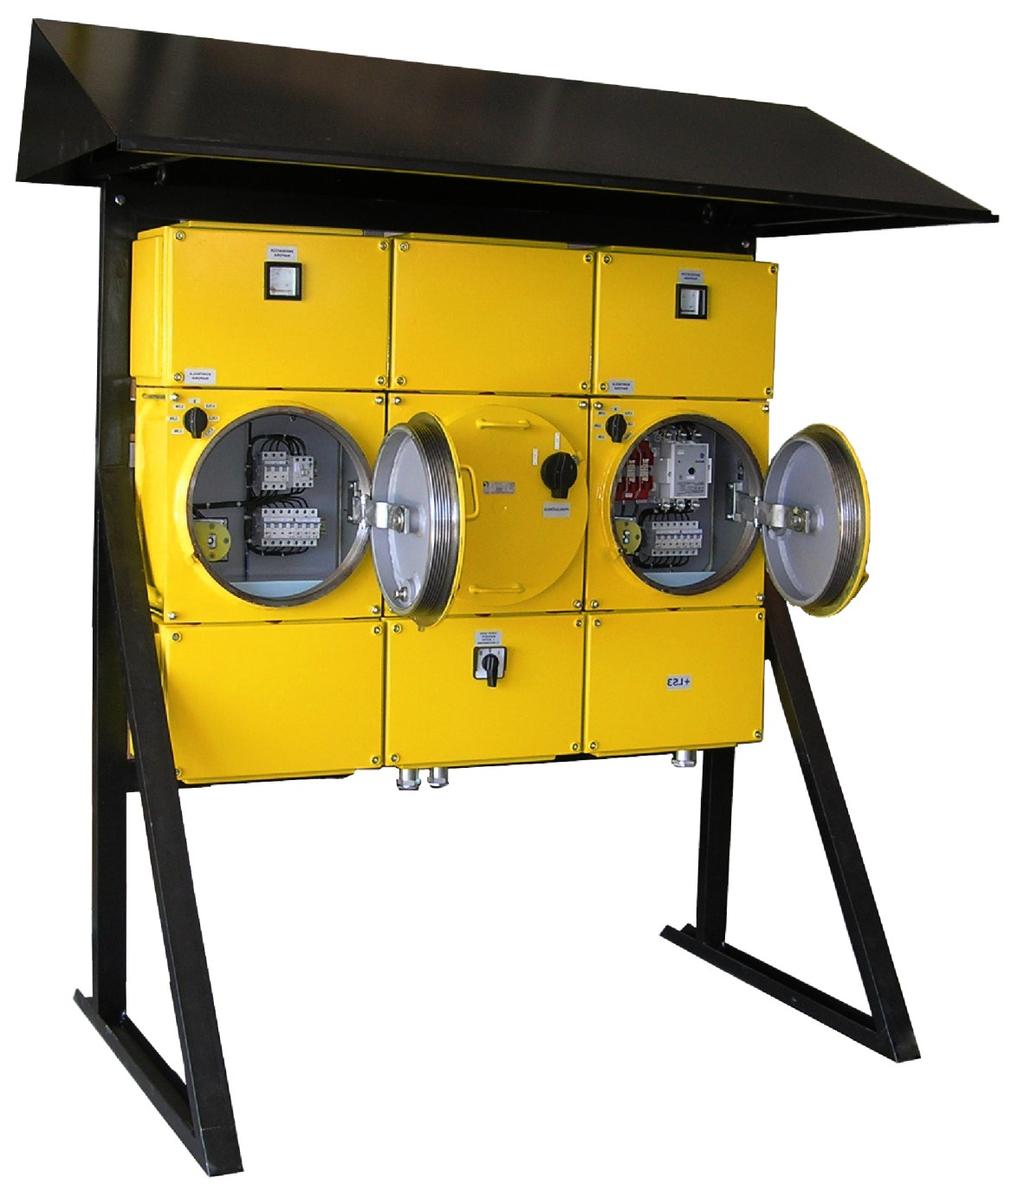 and distribution units For use in underground mines Cable entries available: Direct : cable glands, Indirect : via Ex e enclosure multiwire bushing, conductor insulator CONSTRUCTION Enclosure: sheet